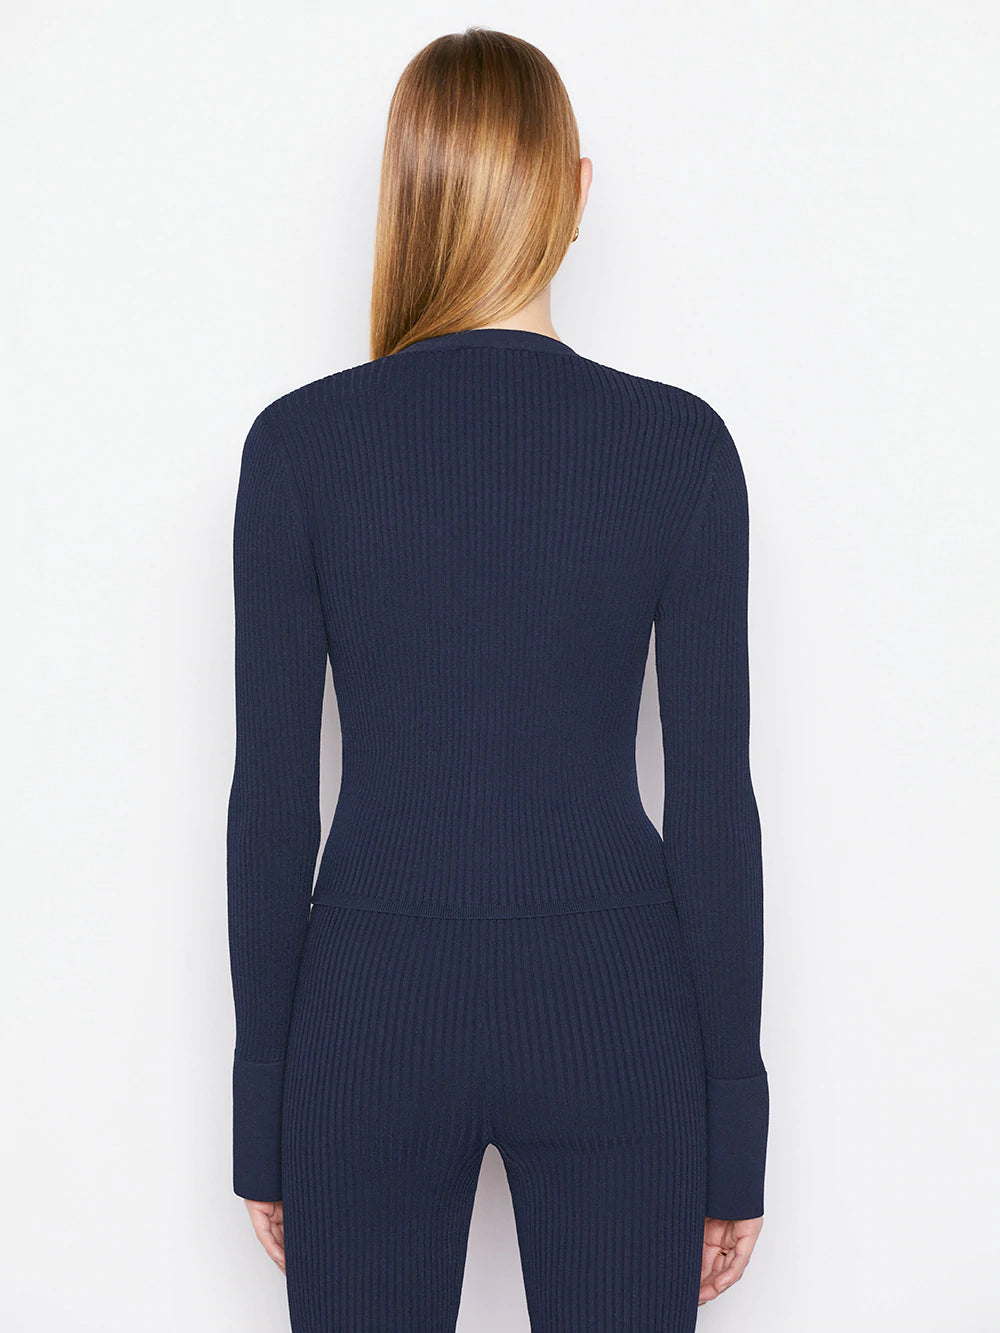 FRAME - Button Front Navy Cardigan